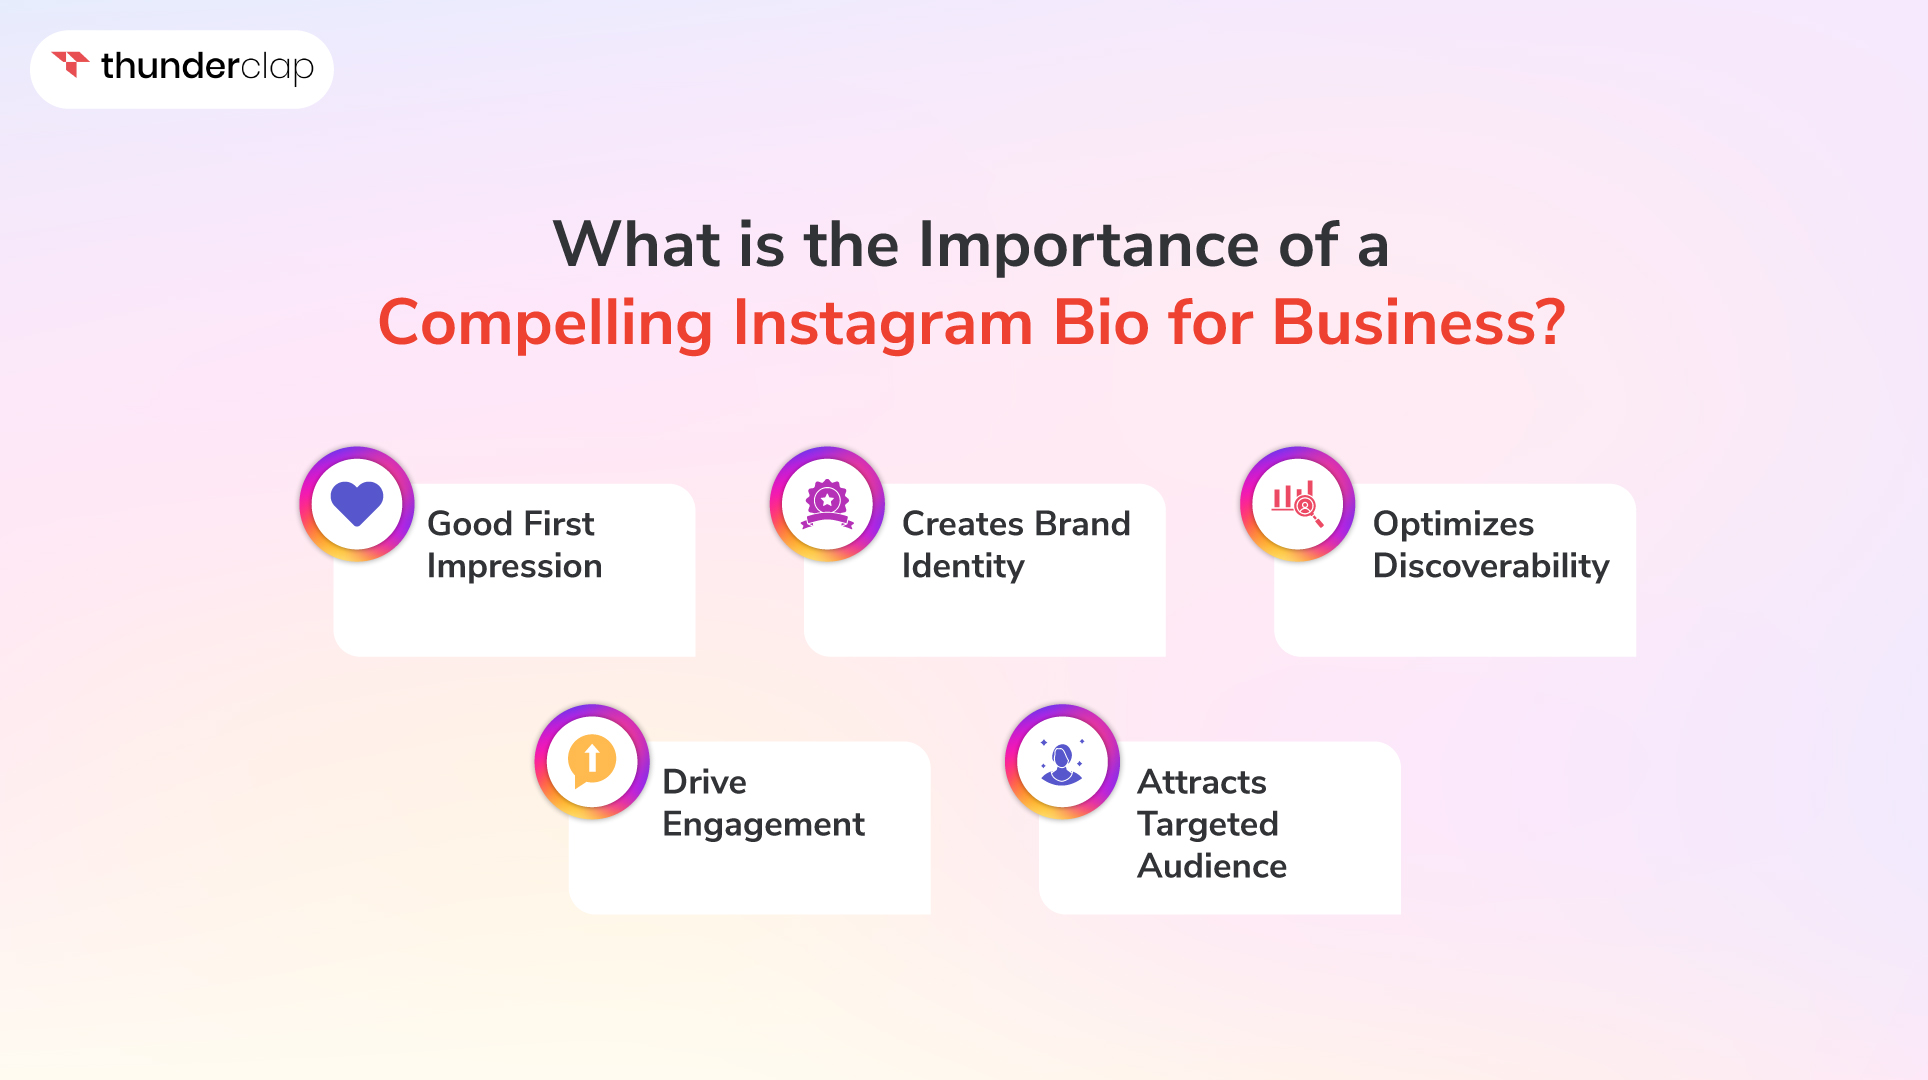 What is the Importance of a Compelling Instagram Bio for Business